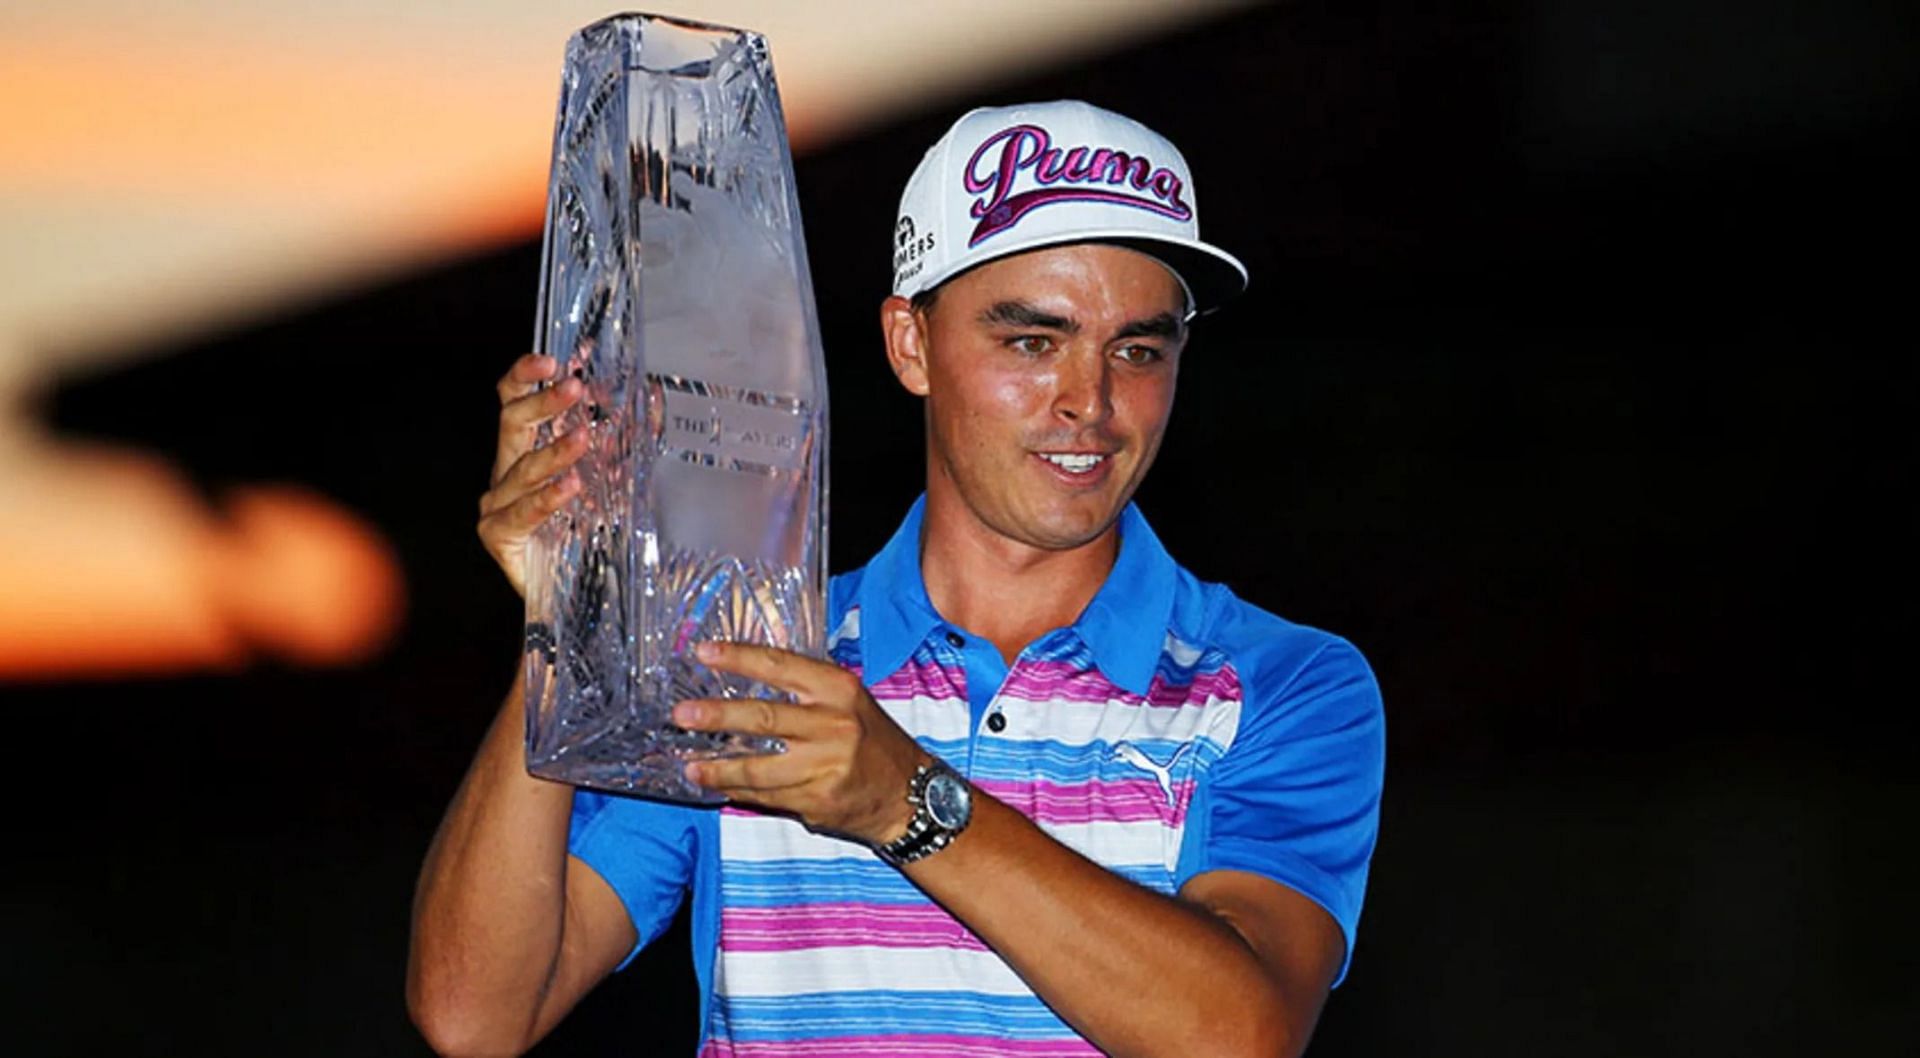 Rickie Fowler won his biggest title at the 2015 Players Championship